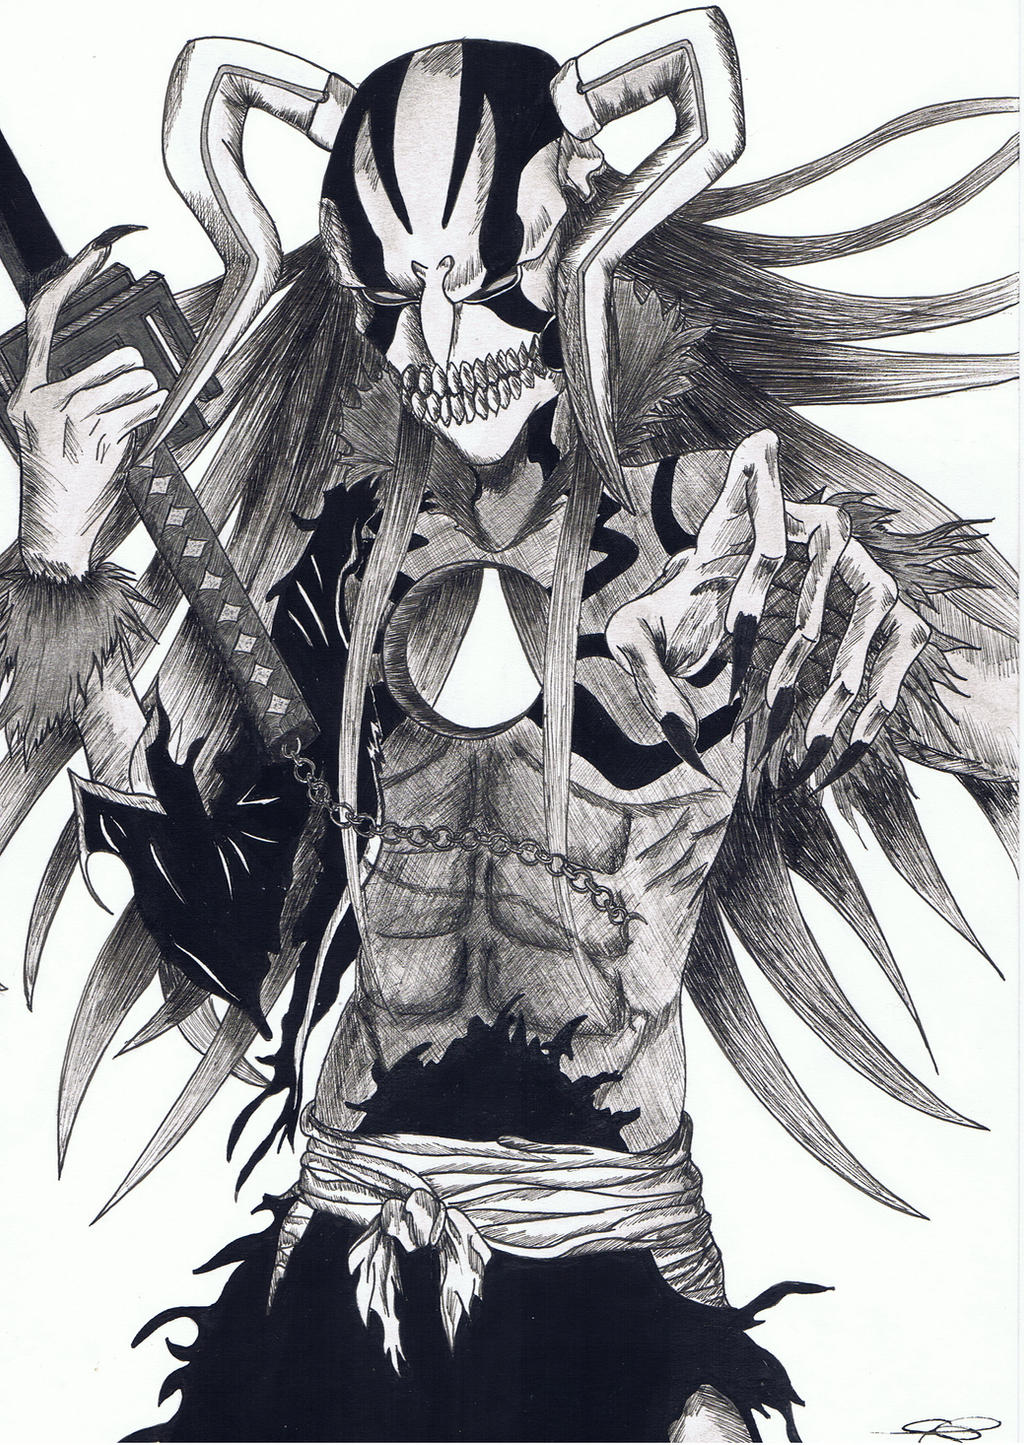 Drawing Ichigo Vasto Lorde with Only Black Color - BLEACH 😳#drawing #